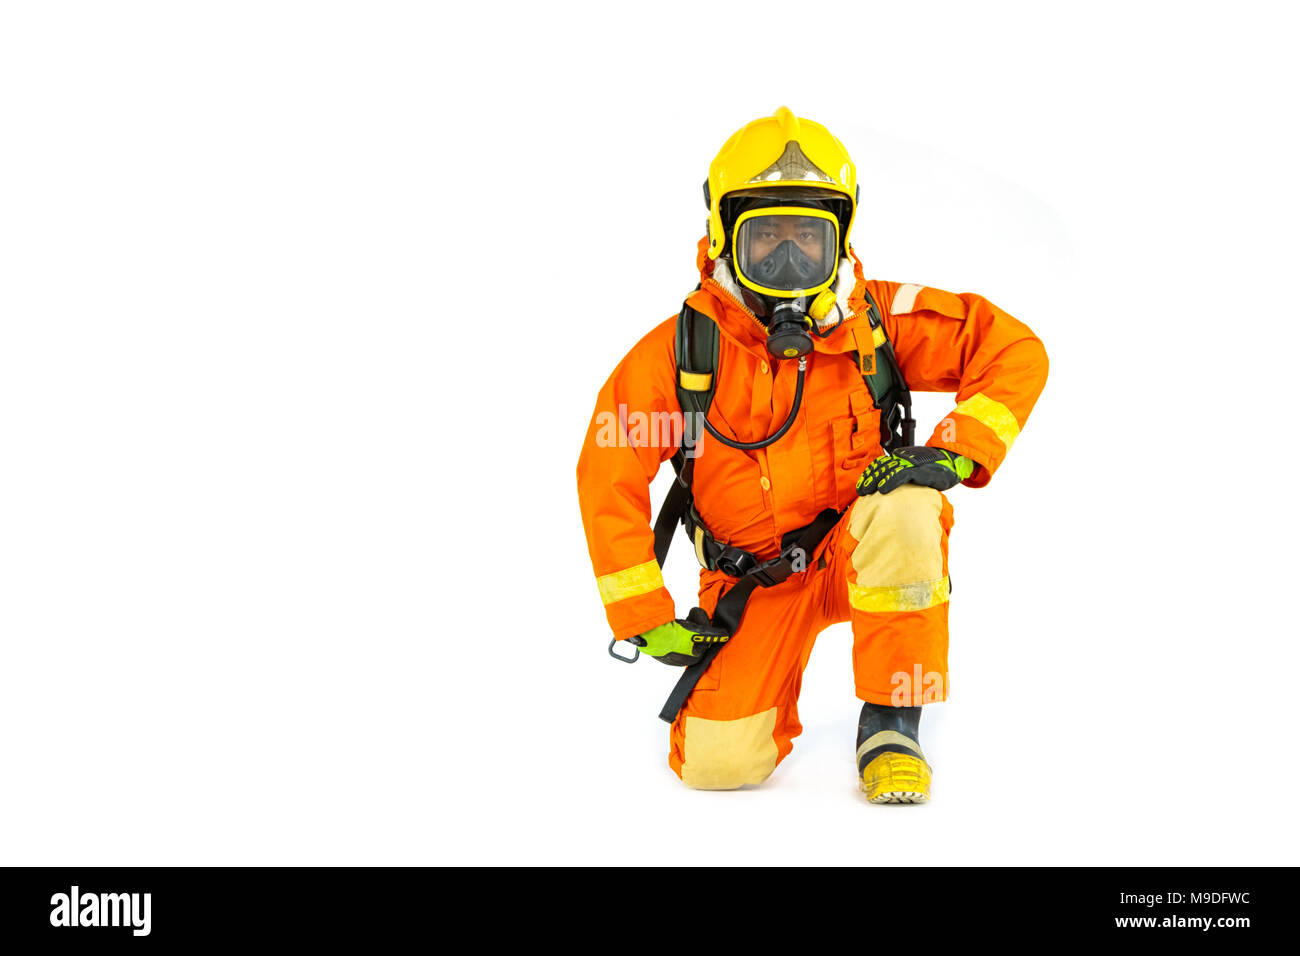 Firefighter Full Cut Out Stock Images And Pictures Alamy